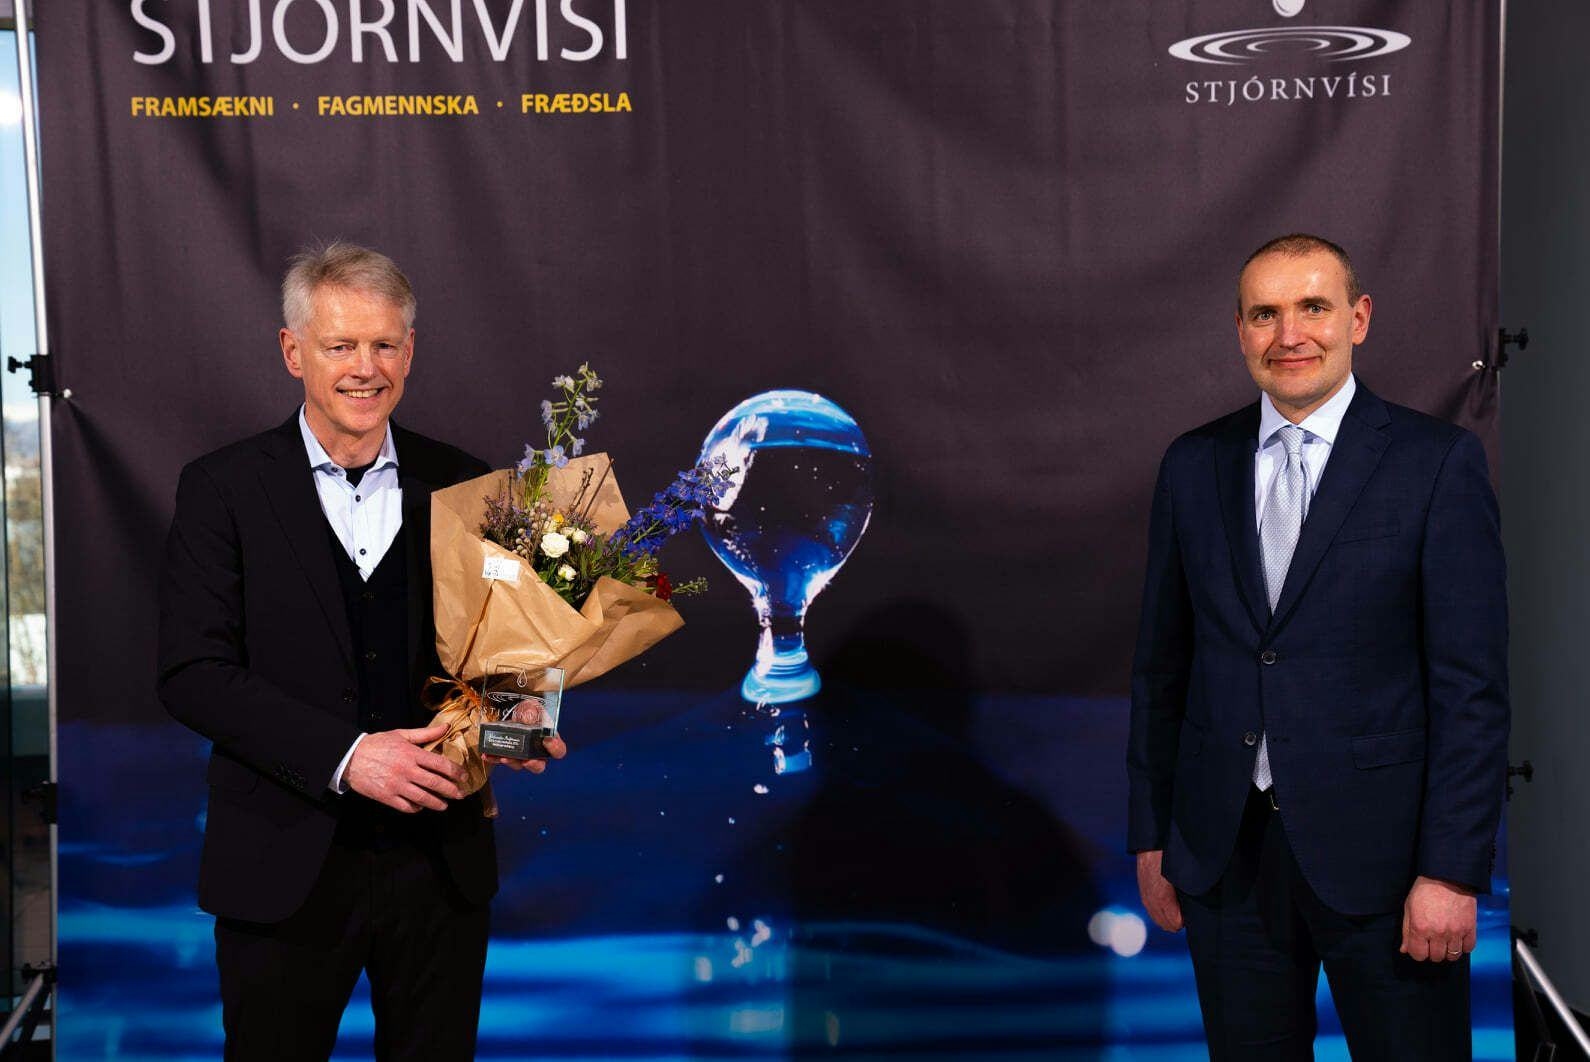 Two men in suits, one holding a bouquet of flowers, standing in front of a backdrop with the word "Stjórnvísi" and other texts